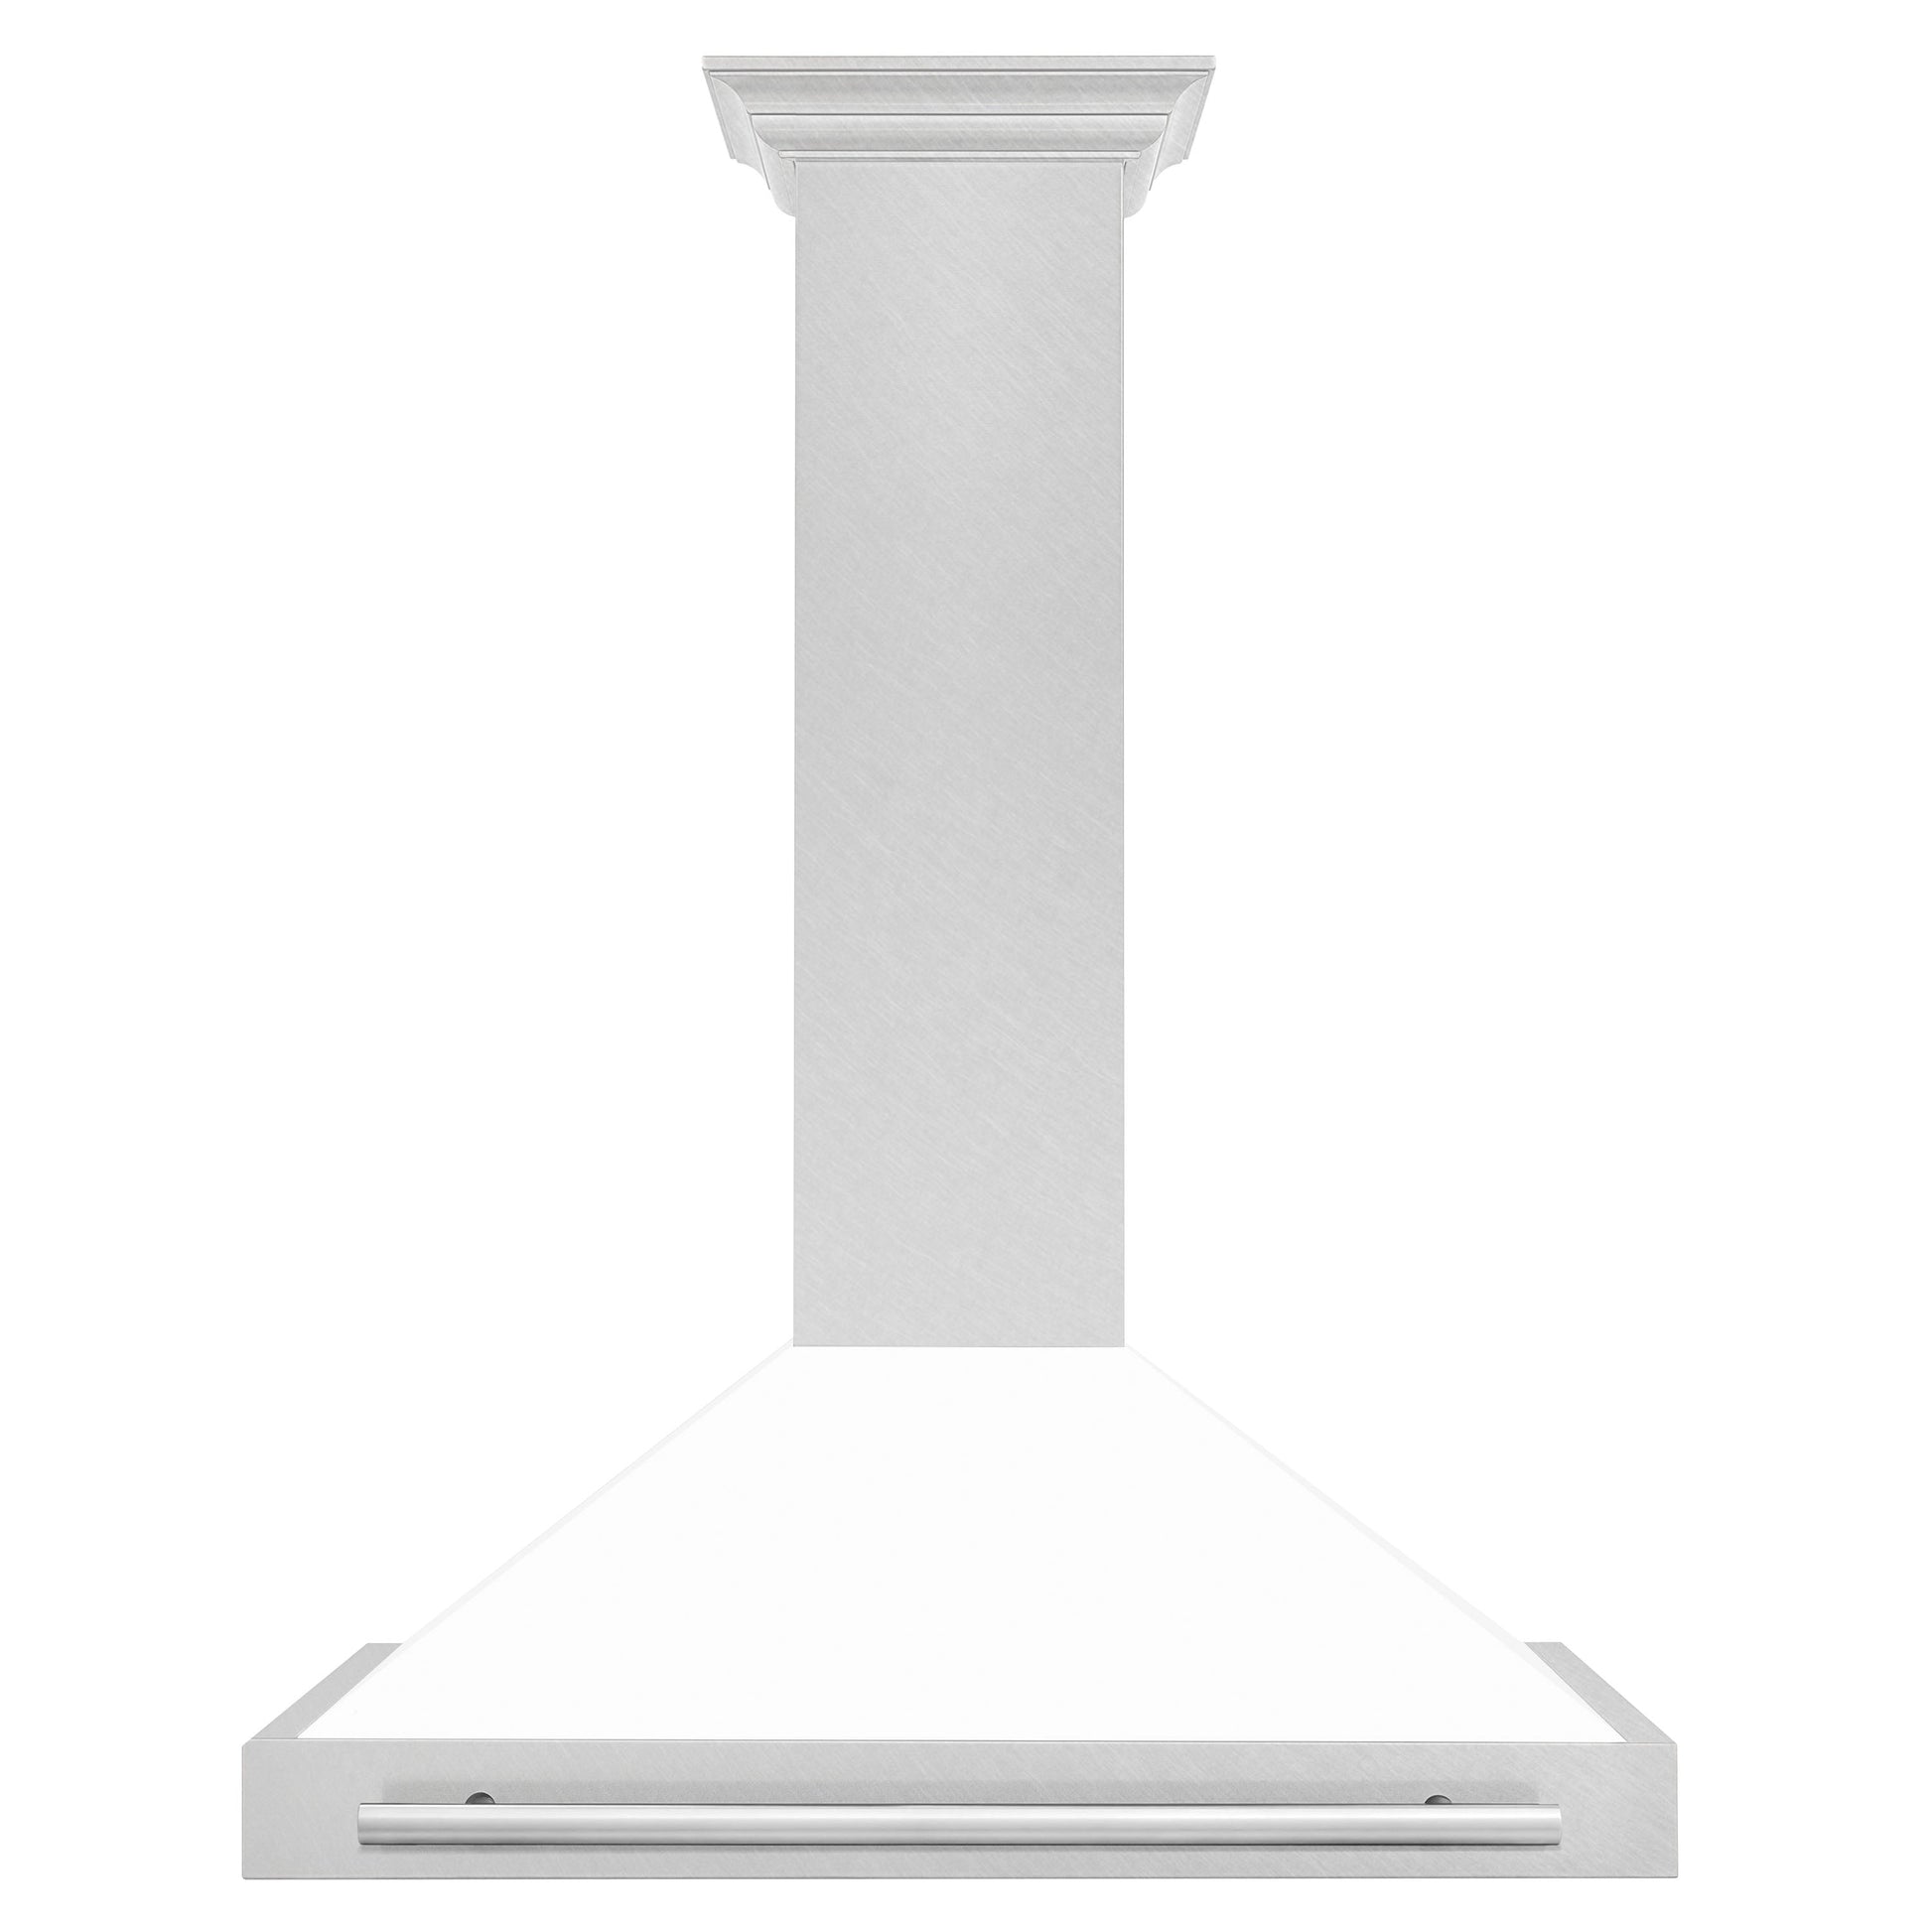 ZLINE 36" DuraSnow Stainless Steel Range Hood - Stainless Steel Handle with Colored Shell Options